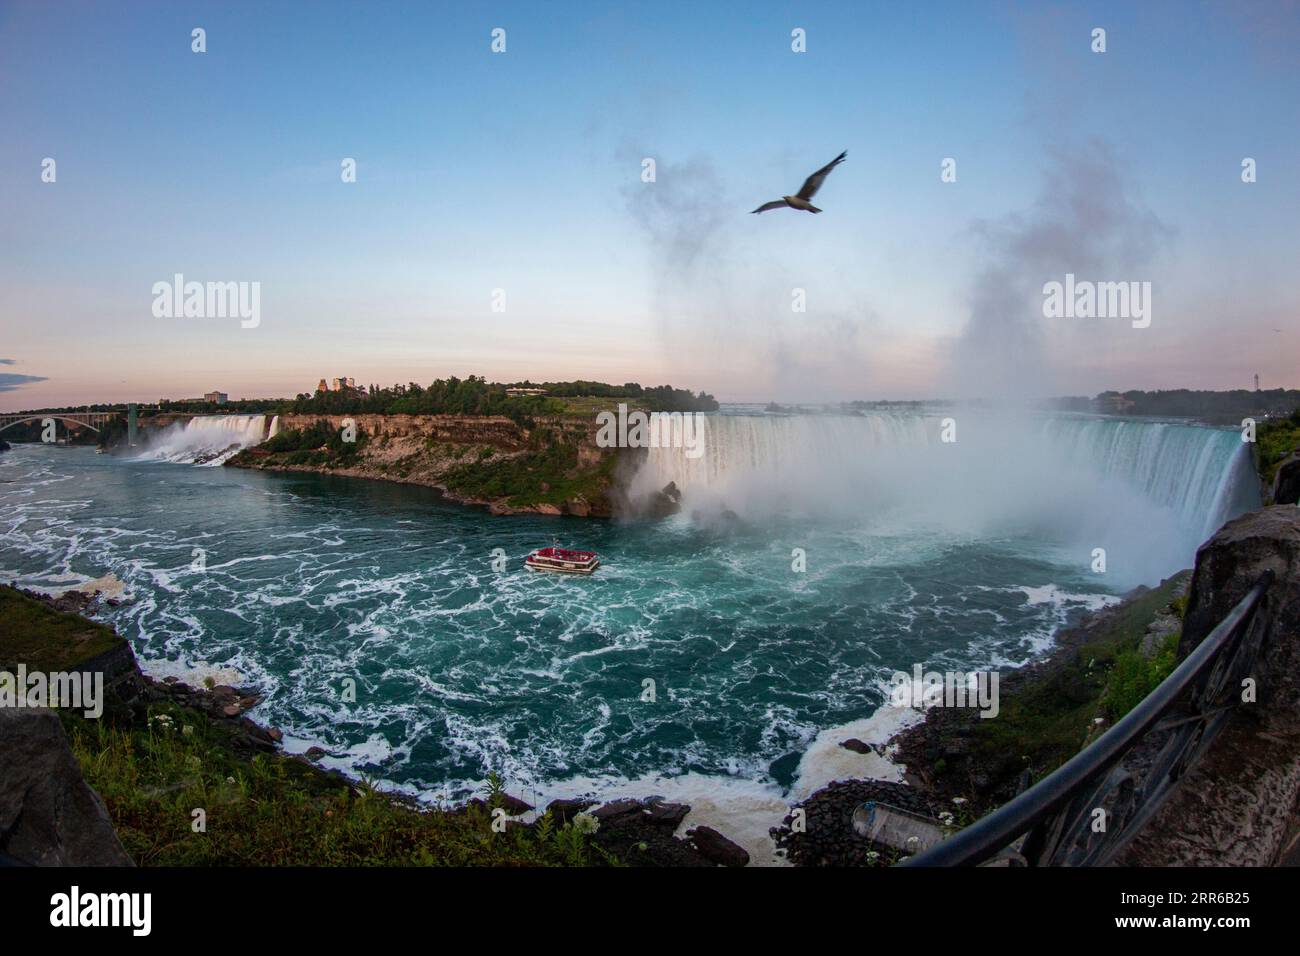 Fisheye view of Niagara Falls waterfalls with the maid of the mist below and a seagull flying above. Stock Photo